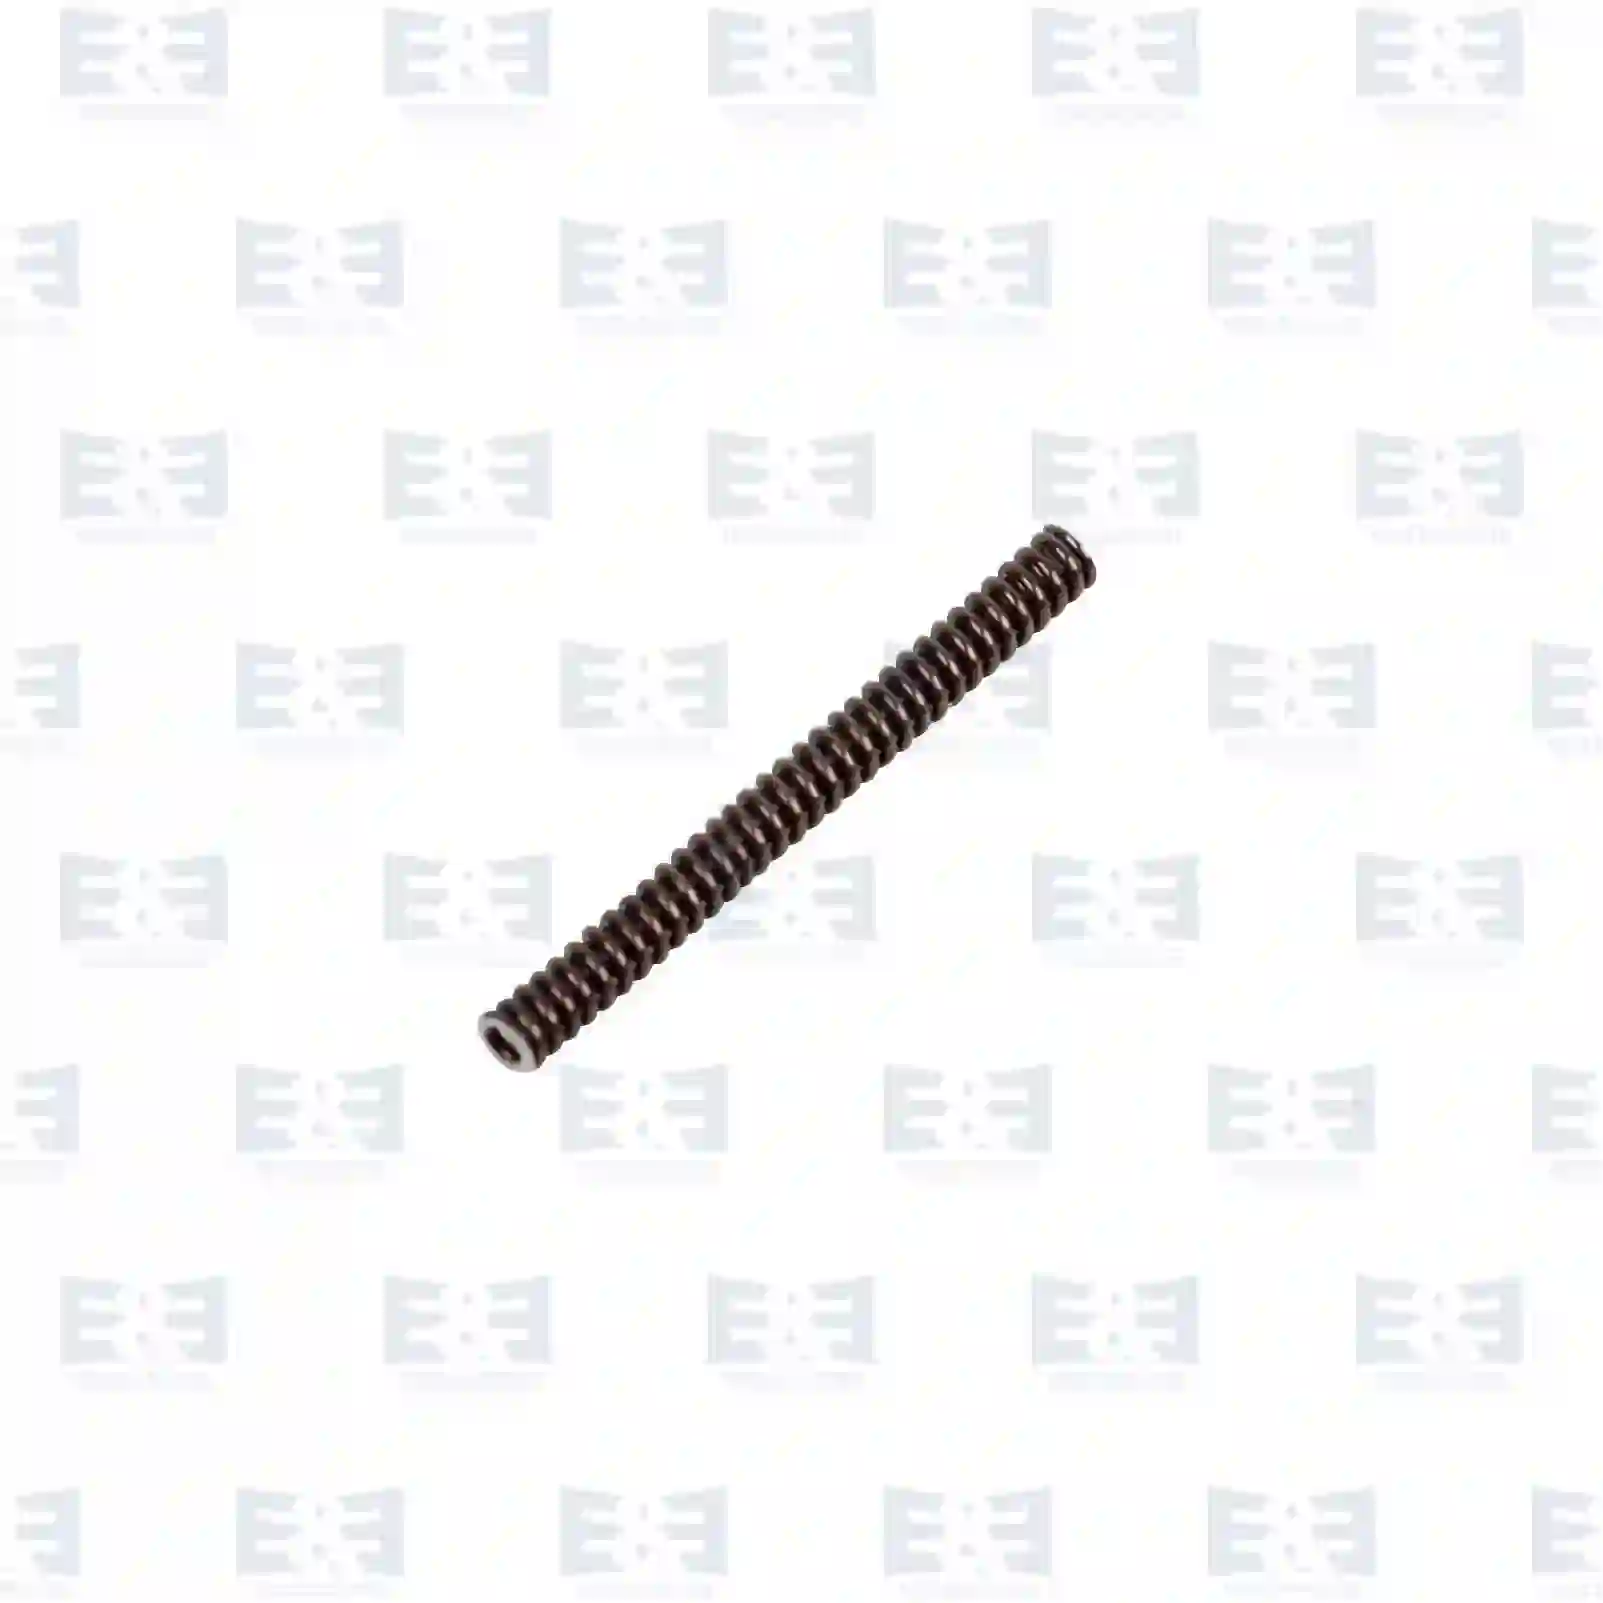 Gearbox Unit Pressure spring, inner, EE No 2E2279478 ,  oem no:0326964, 326964, 09931785, 9931785, 81976010758, 3362640793, 052100920, 5000255277, 8321999387, 6635323 E&E Truck Spare Parts | Truck Spare Parts, Auotomotive Spare Parts